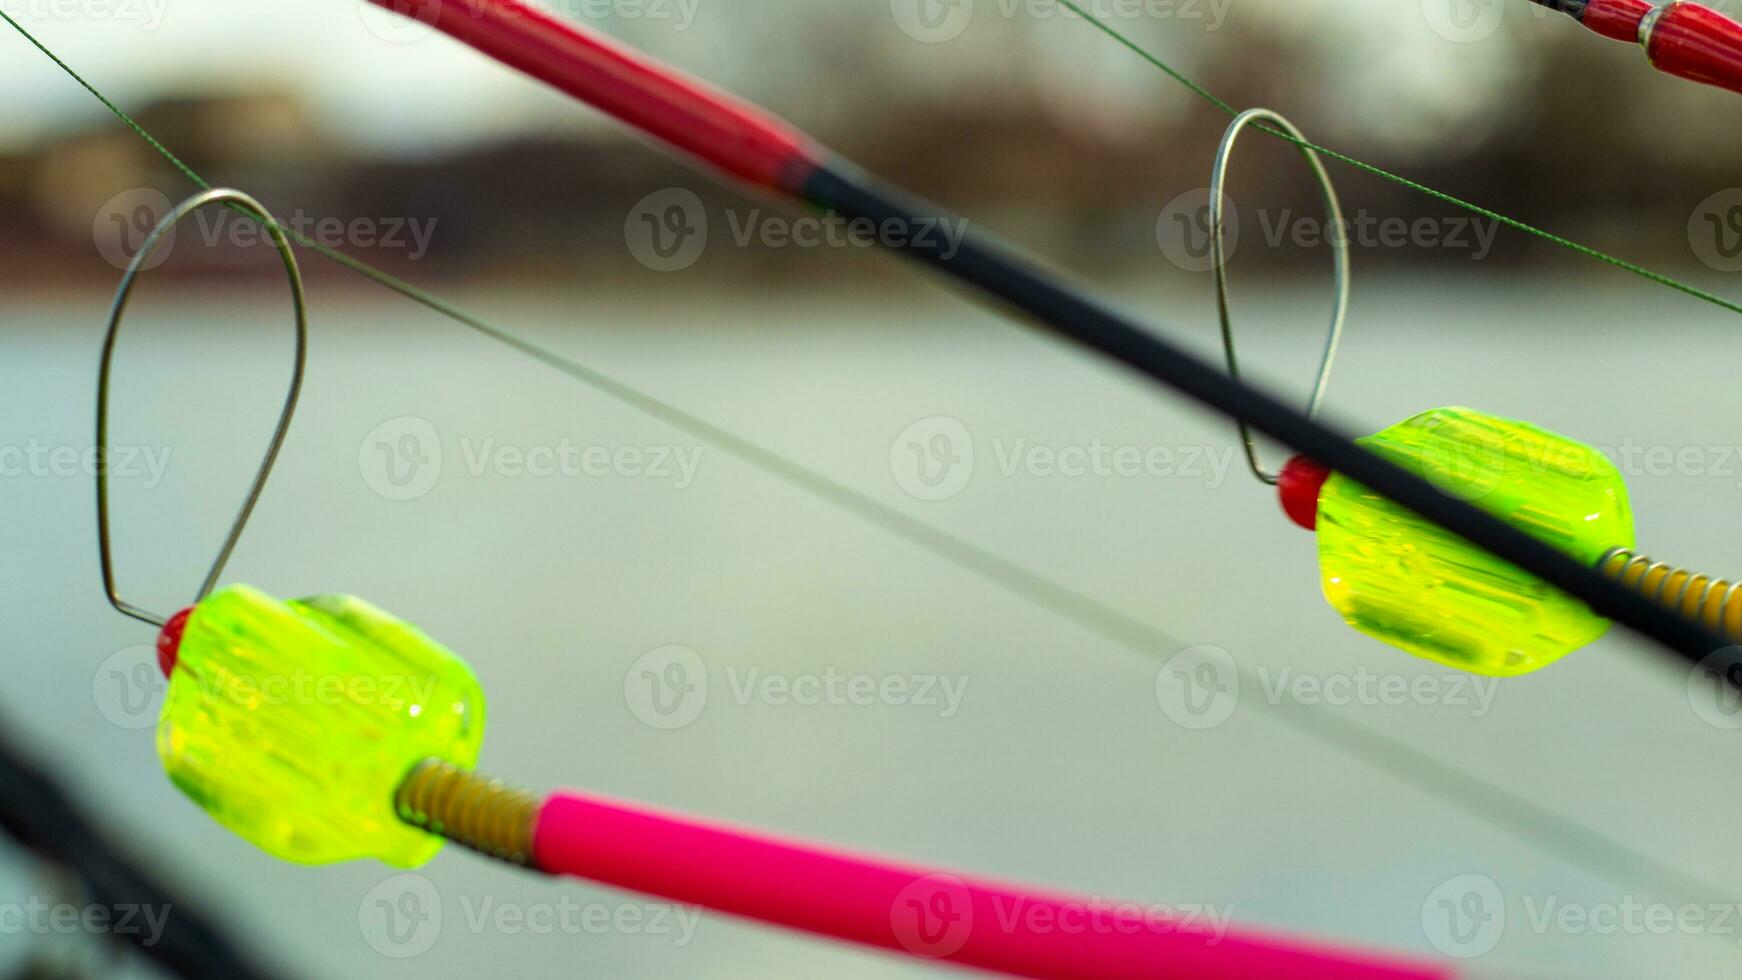 The bite alarm hangs on a fishing rod against the background of water. Fishing rod while fishing on the lake, river. Fishing tackle. Carp rod on a stand with a bite alarm on the line. photo